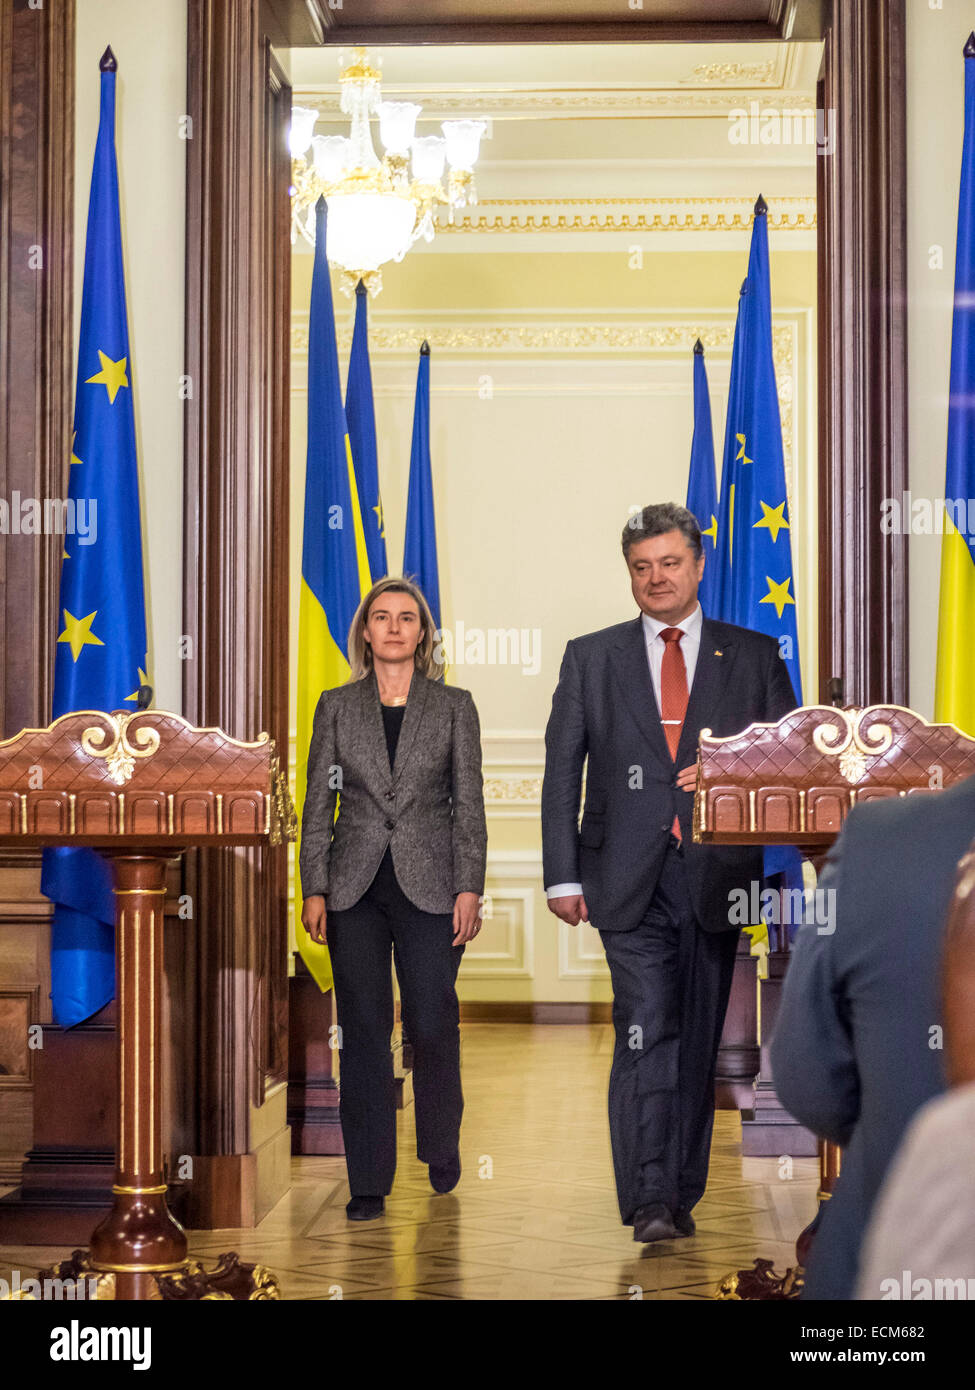 Kiev, Ukraine. 16th December, 2014. President of Ukraine Petro Poroshenko and EU High Representative for Foreign Affairs Federica Mogherini discussed in Kiev the situation in the Donbass and reforms necessary Ukraine. In addition, Ukraine and the EU agreed to complete the implementation of the Action Plan on visa liberalization to the Eastern Partnership summit in May 2015. Credit:  Igor Golovnov/Alamy Live News Stock Photo